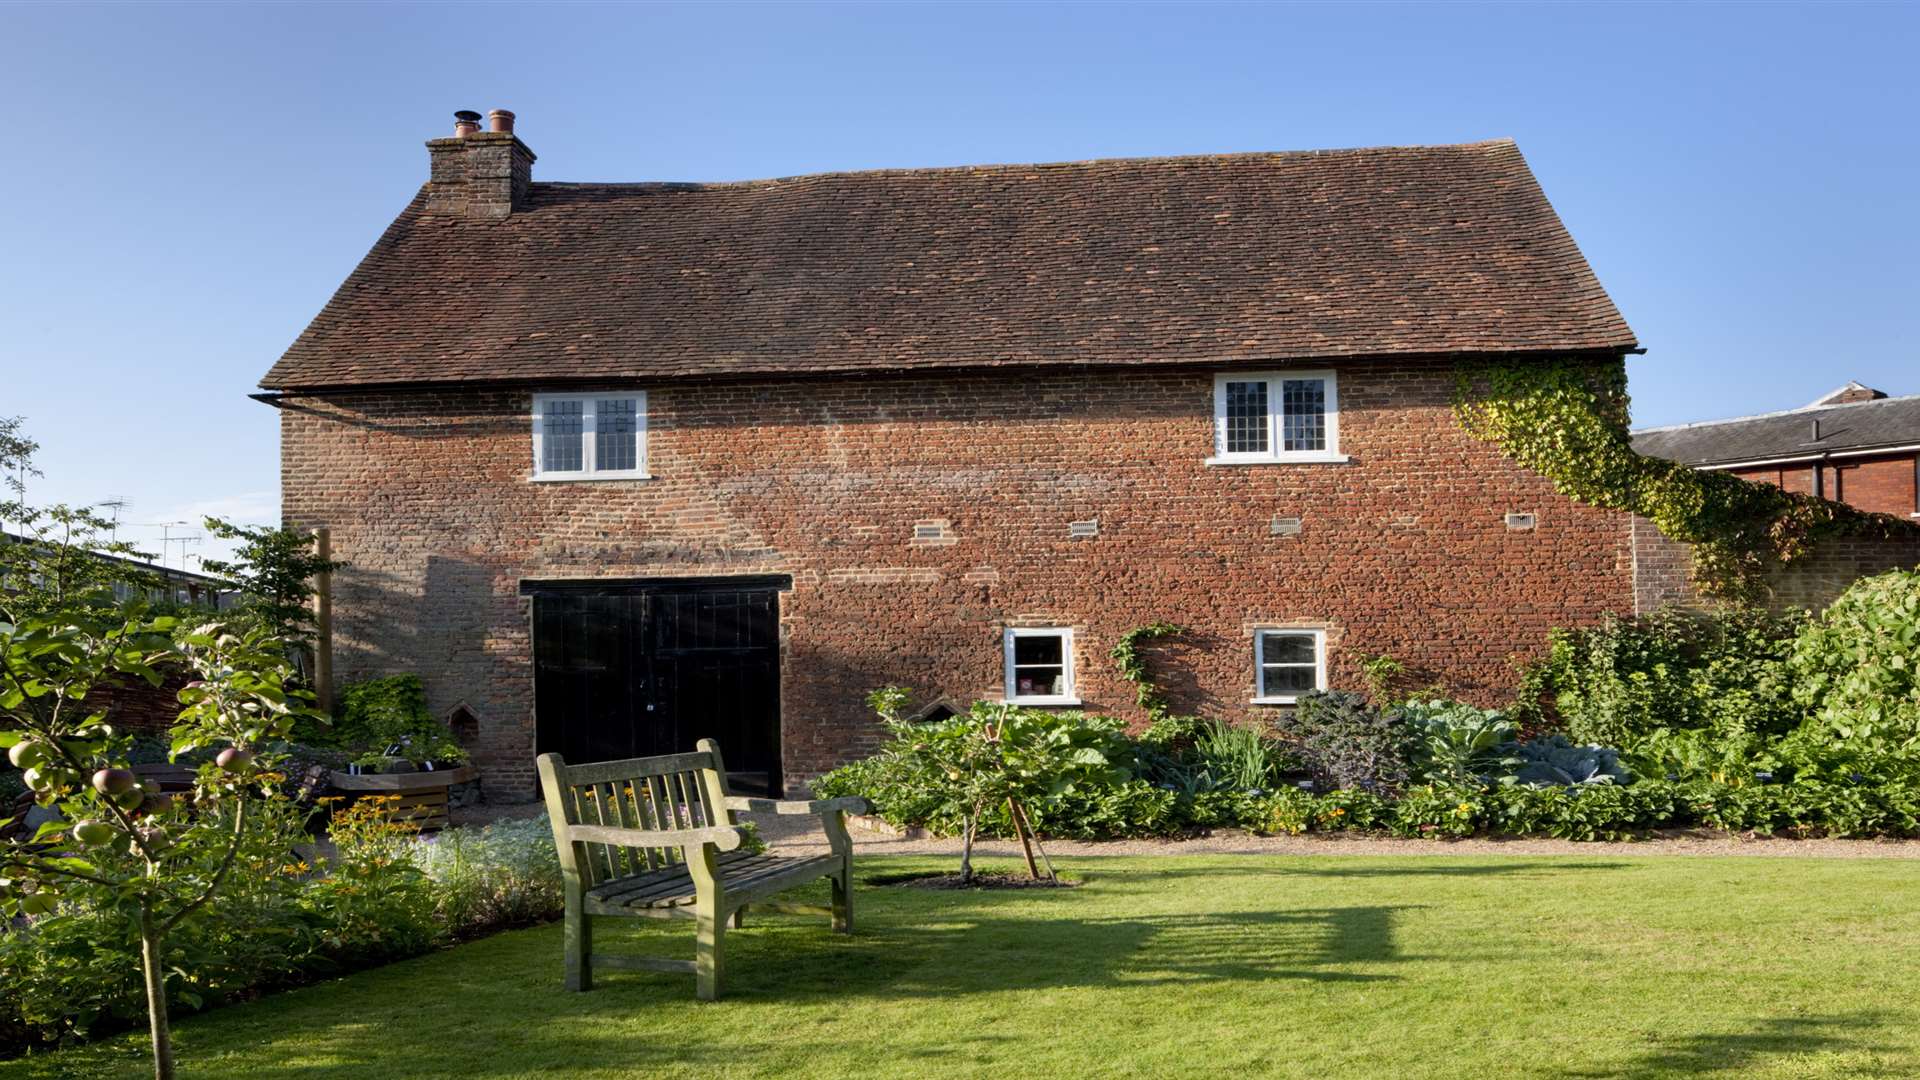 The coach house at Quebec House. Picture: National Trust